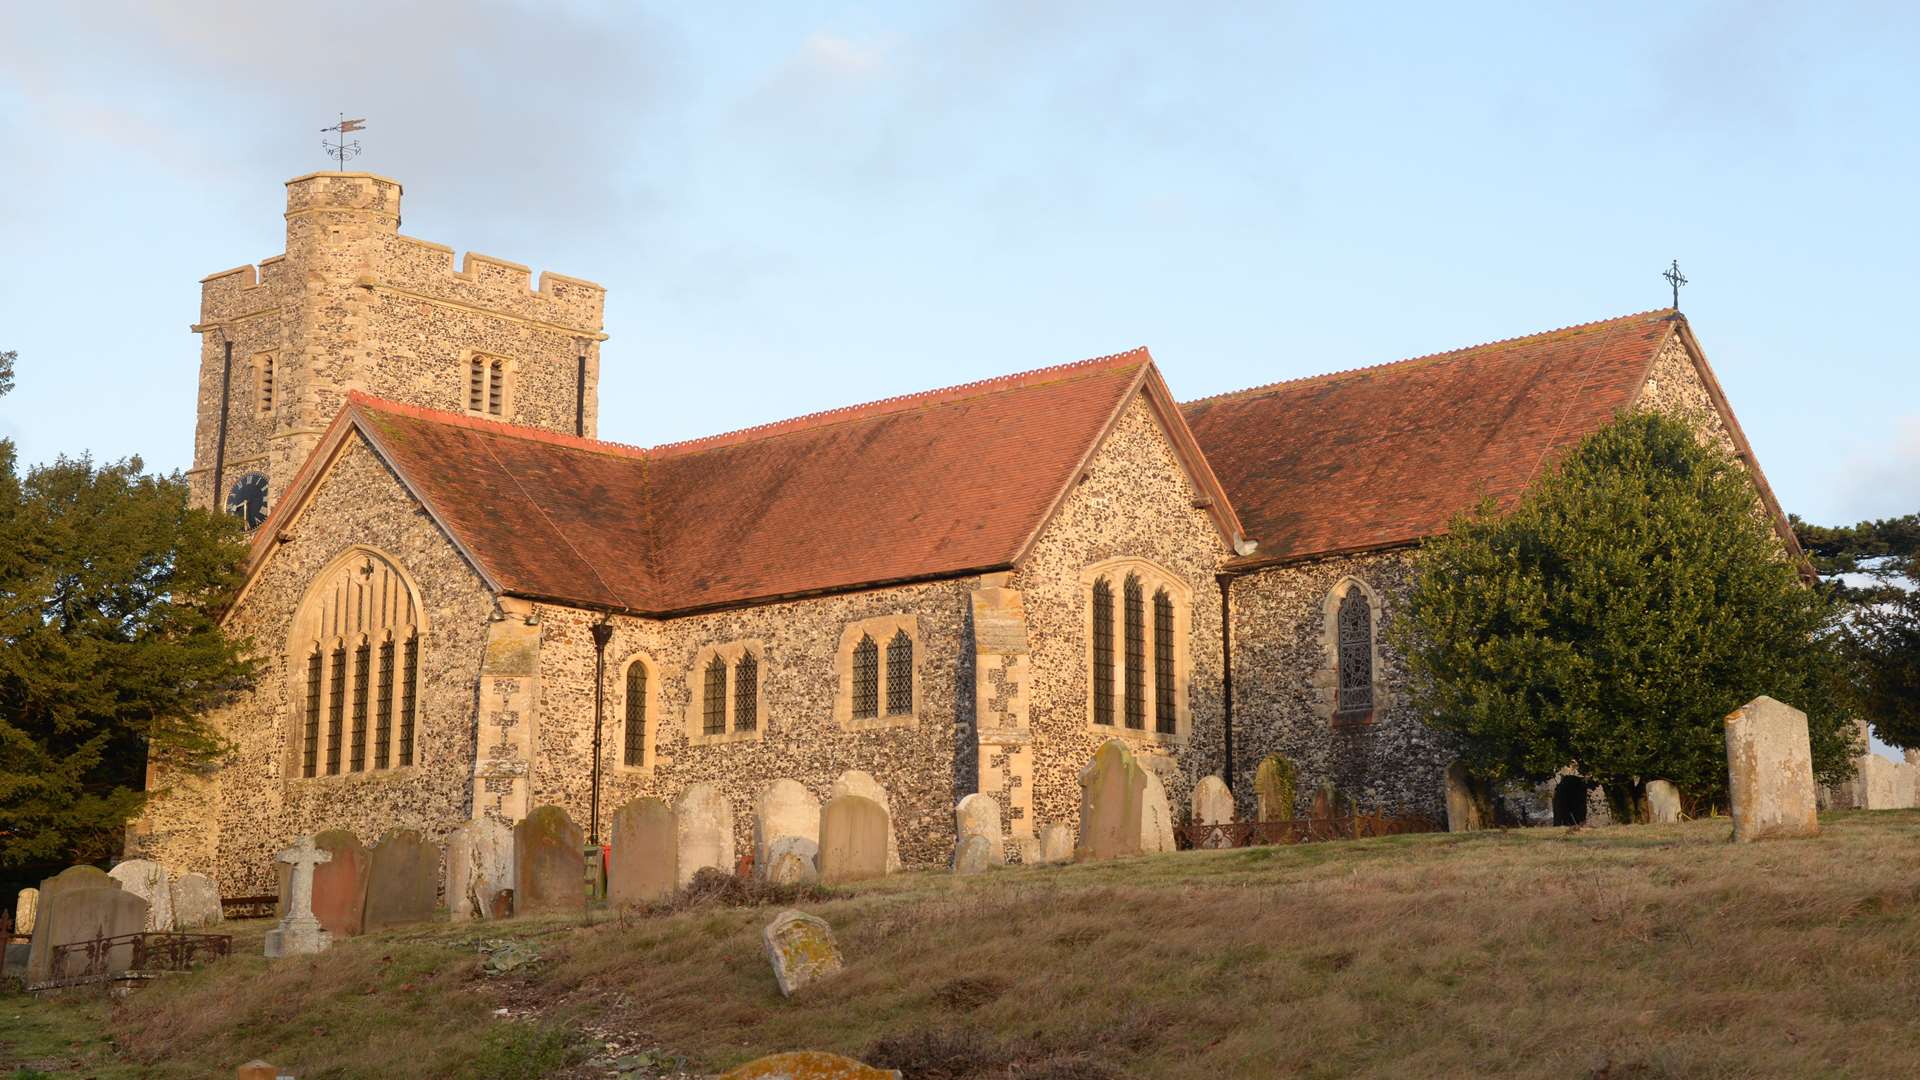 St Peter and St Paul Church, Boughton-under-Blean